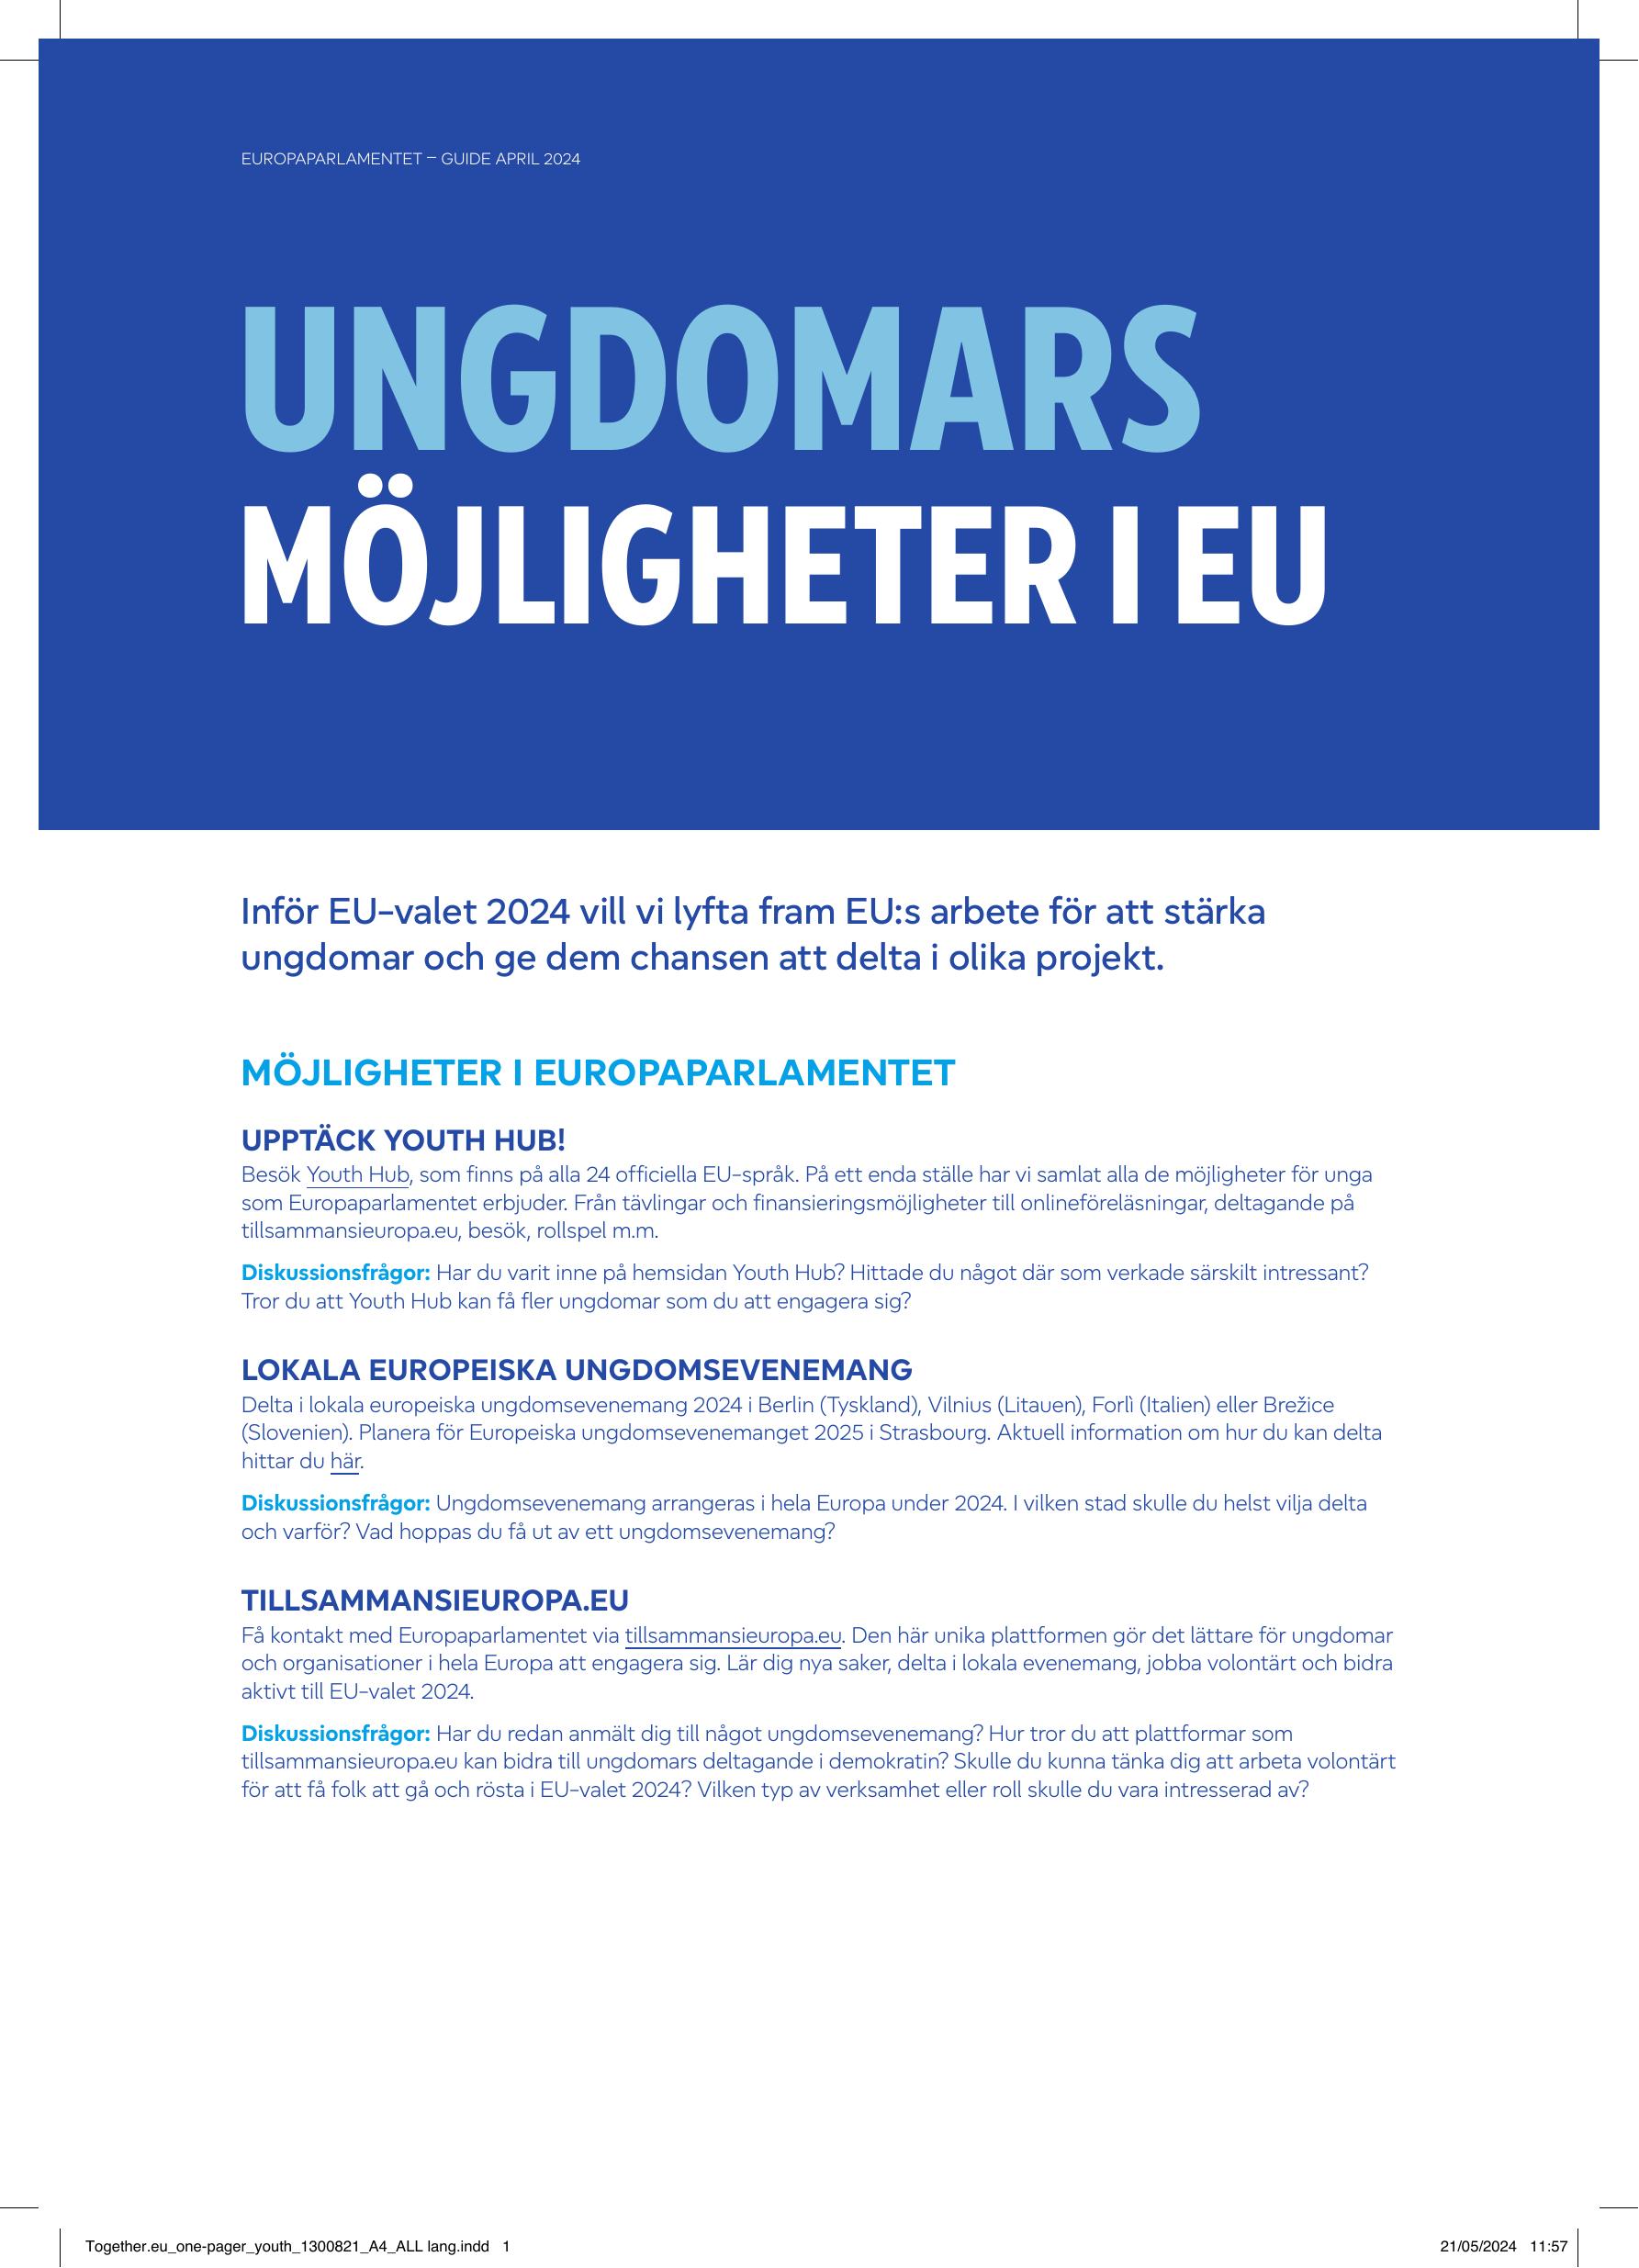 Together.eu_one-pager_youth_print.pdf